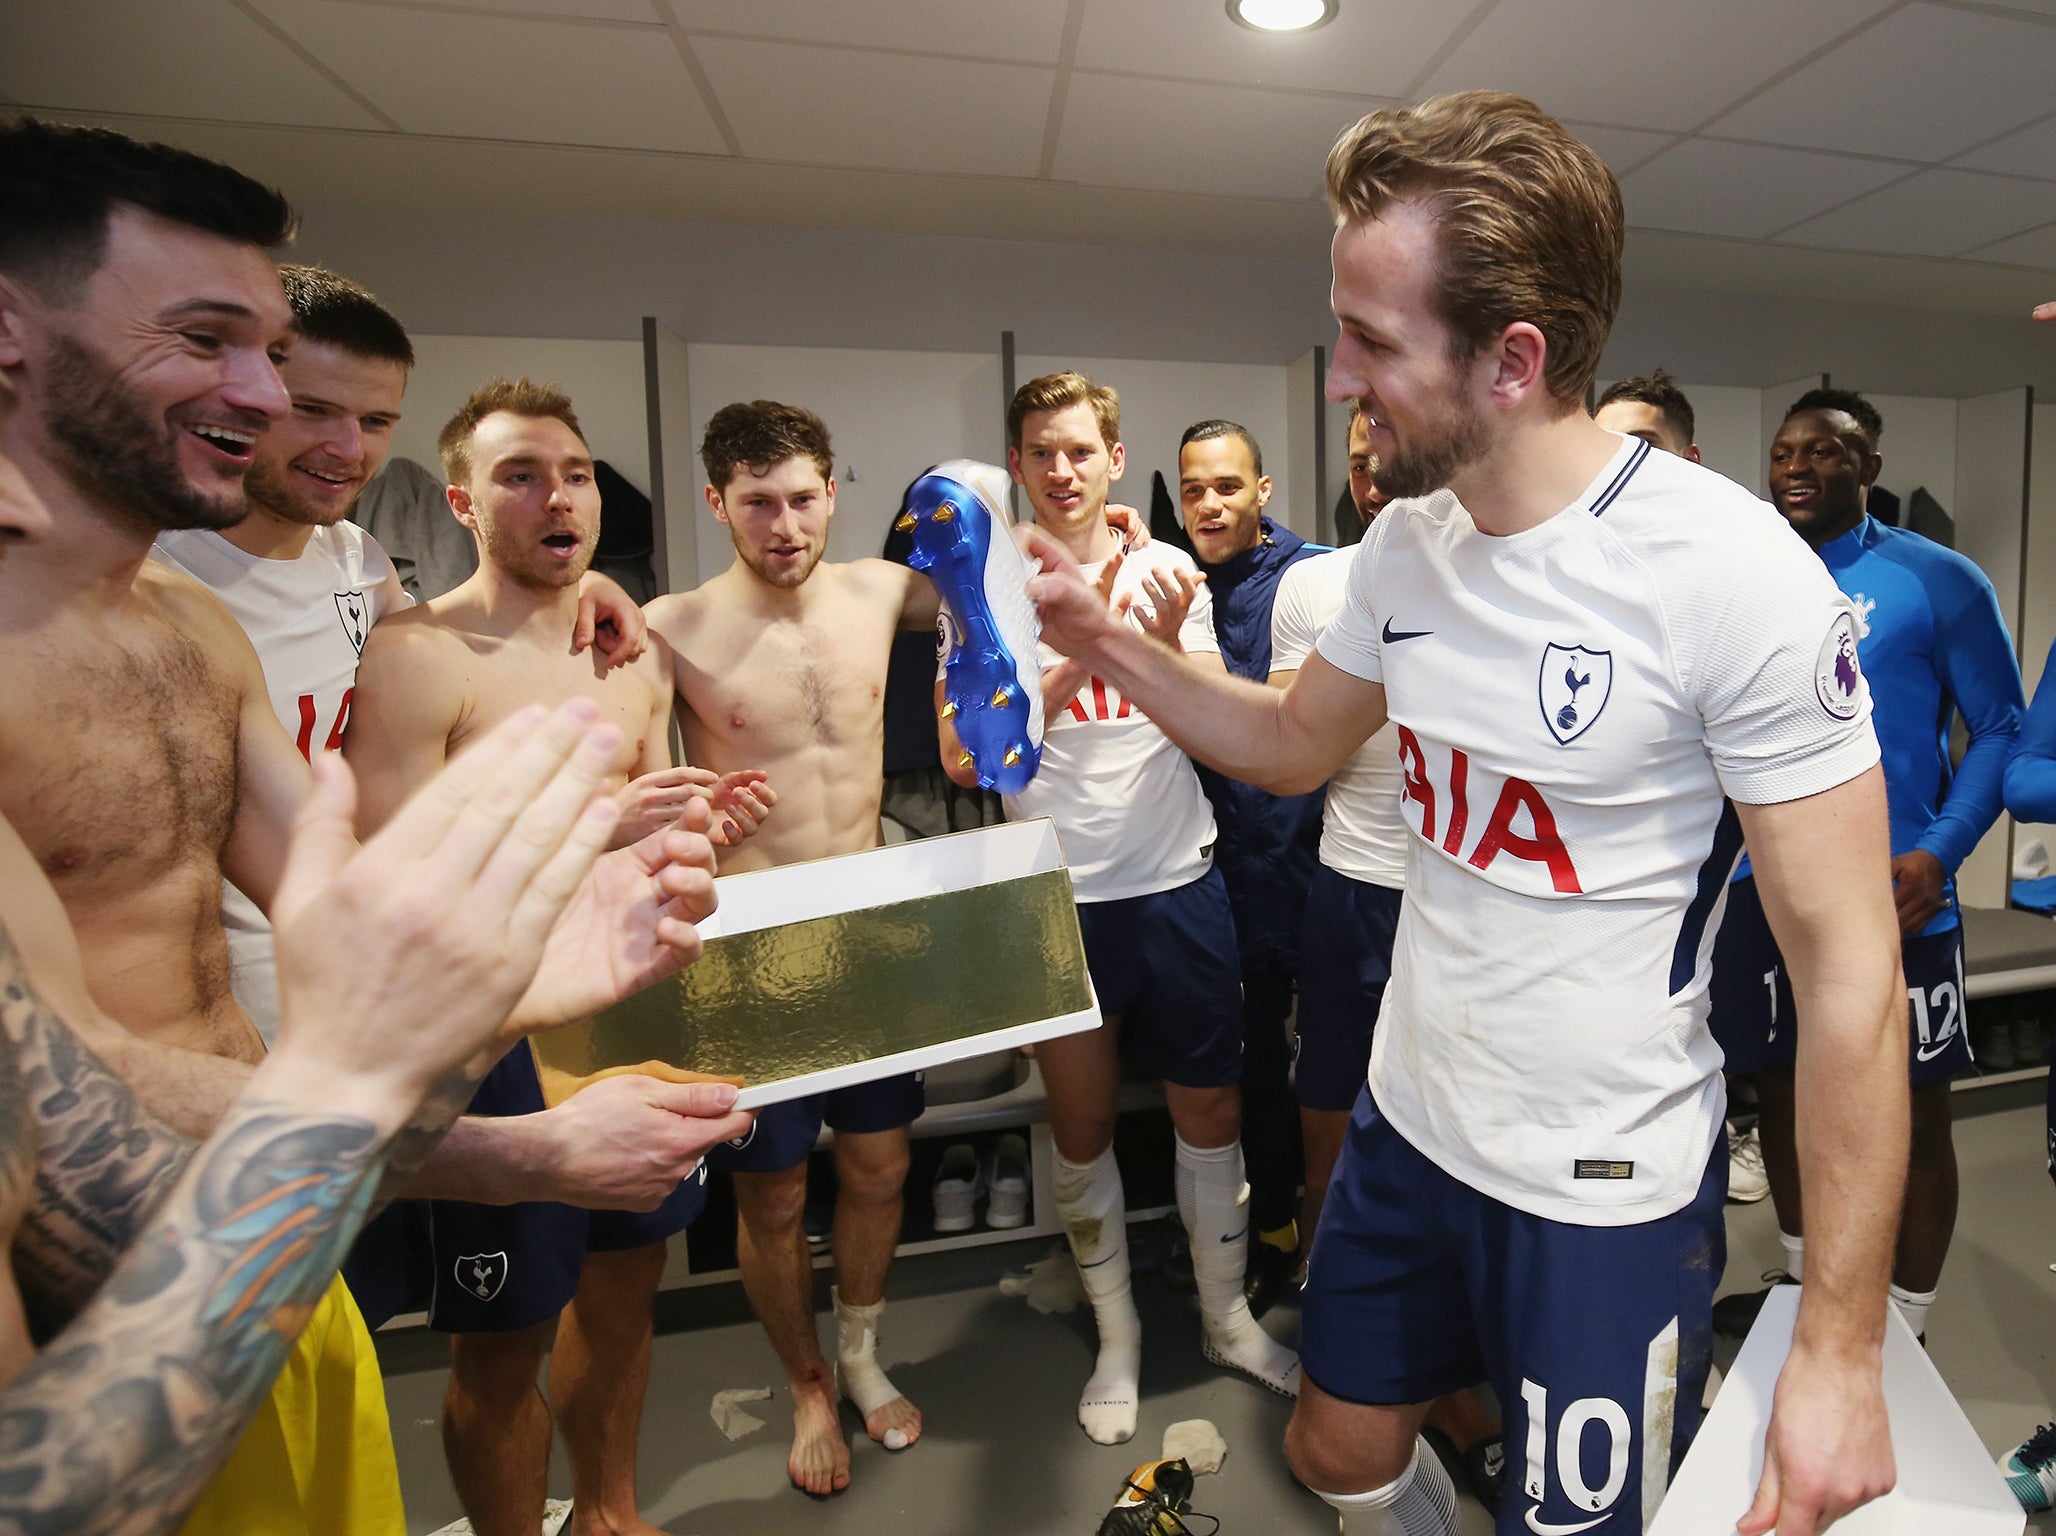 Kane being congratulated by his team-mates